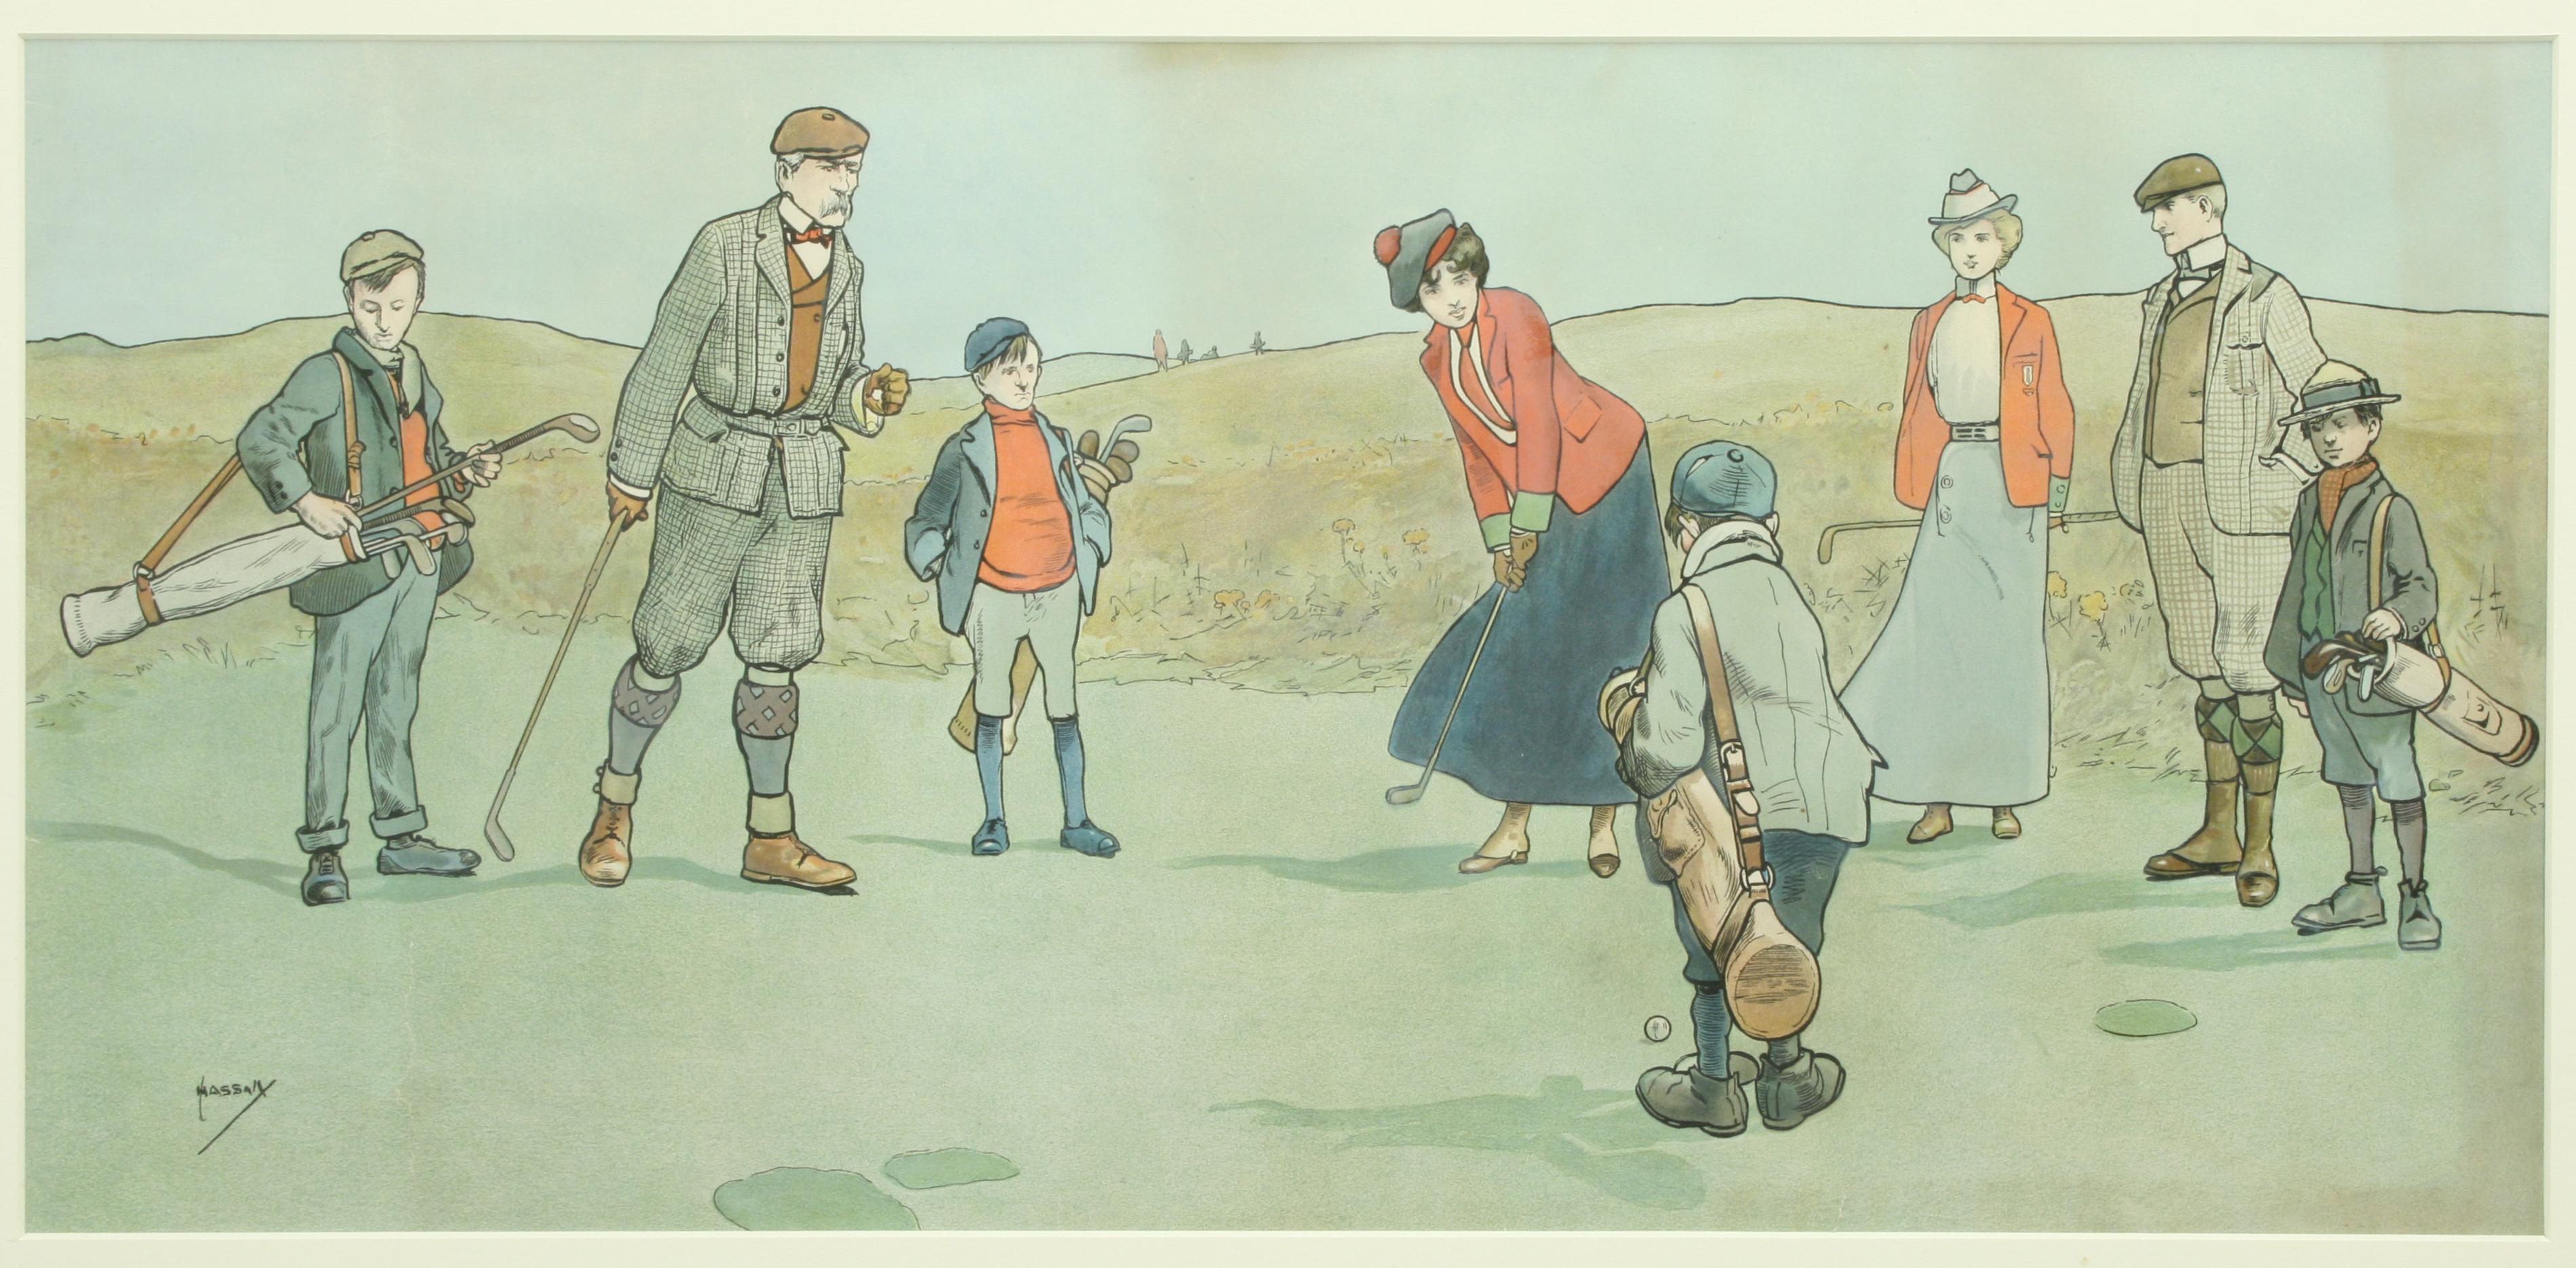 British Vintage Golf Print, Lithograph by John Hassal, Putting Out